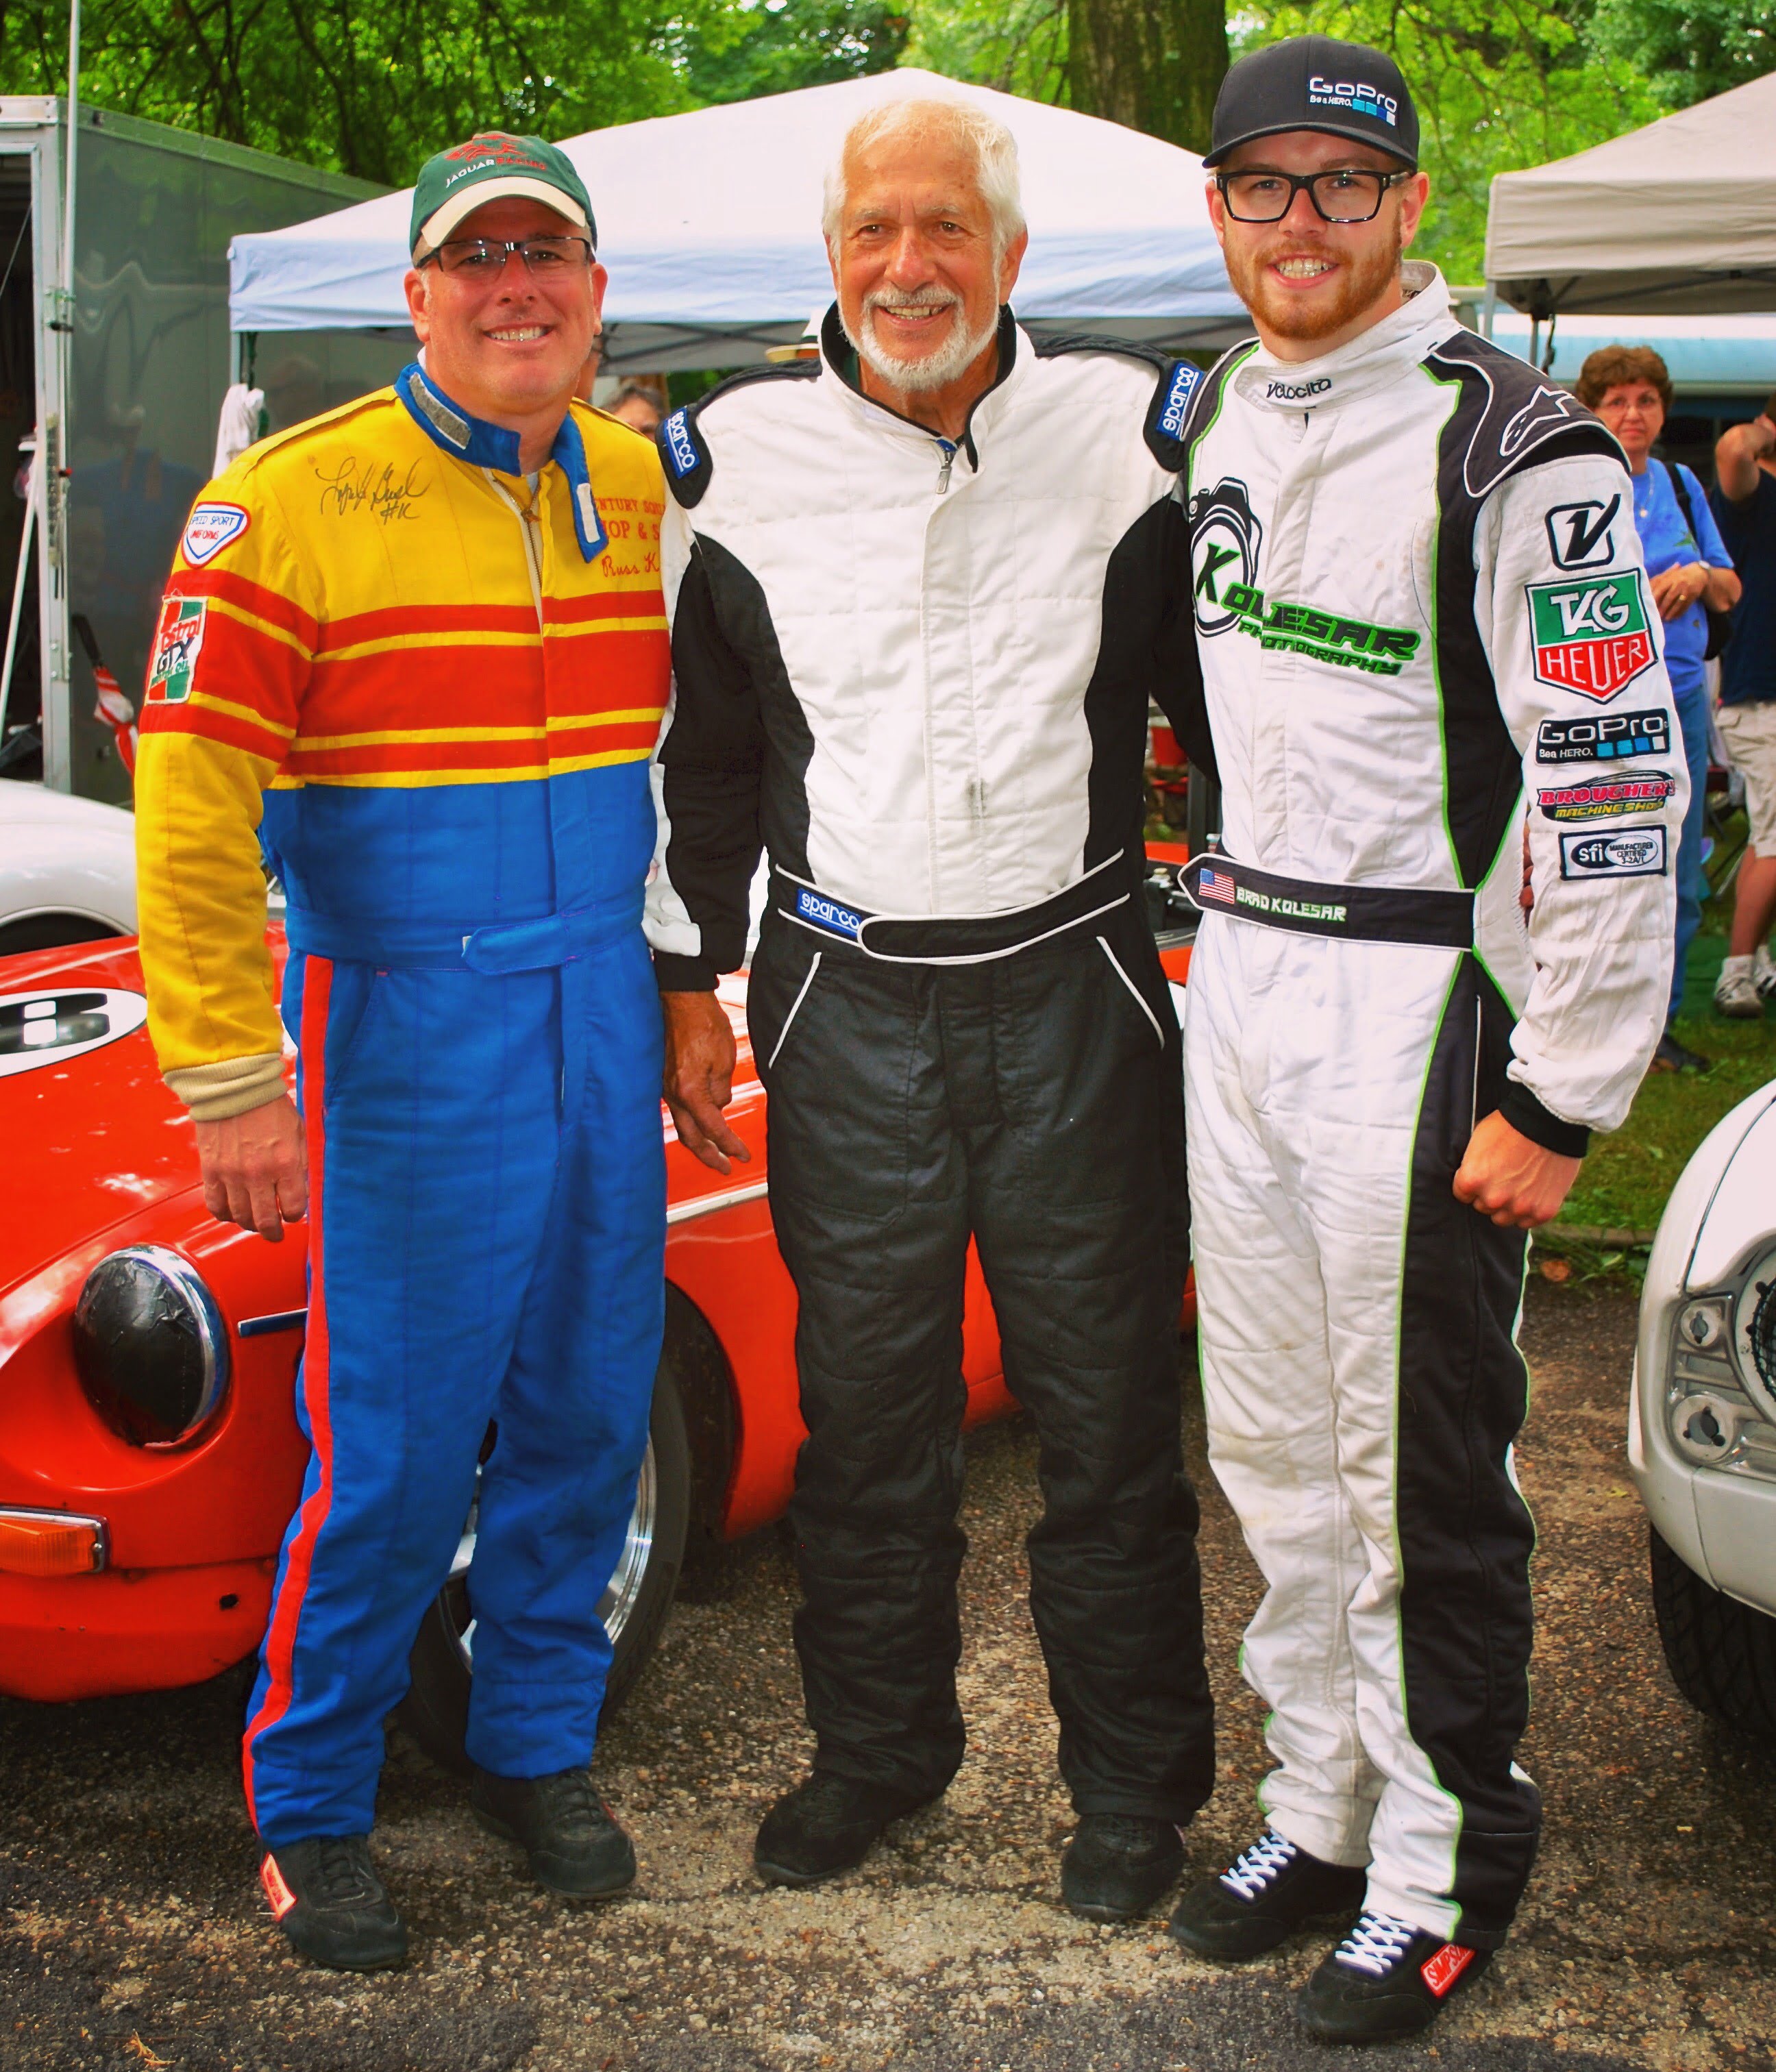 Brad, pictured far right with his dad Russ (left) and grandfather Jack (center) racing at the PVGP.